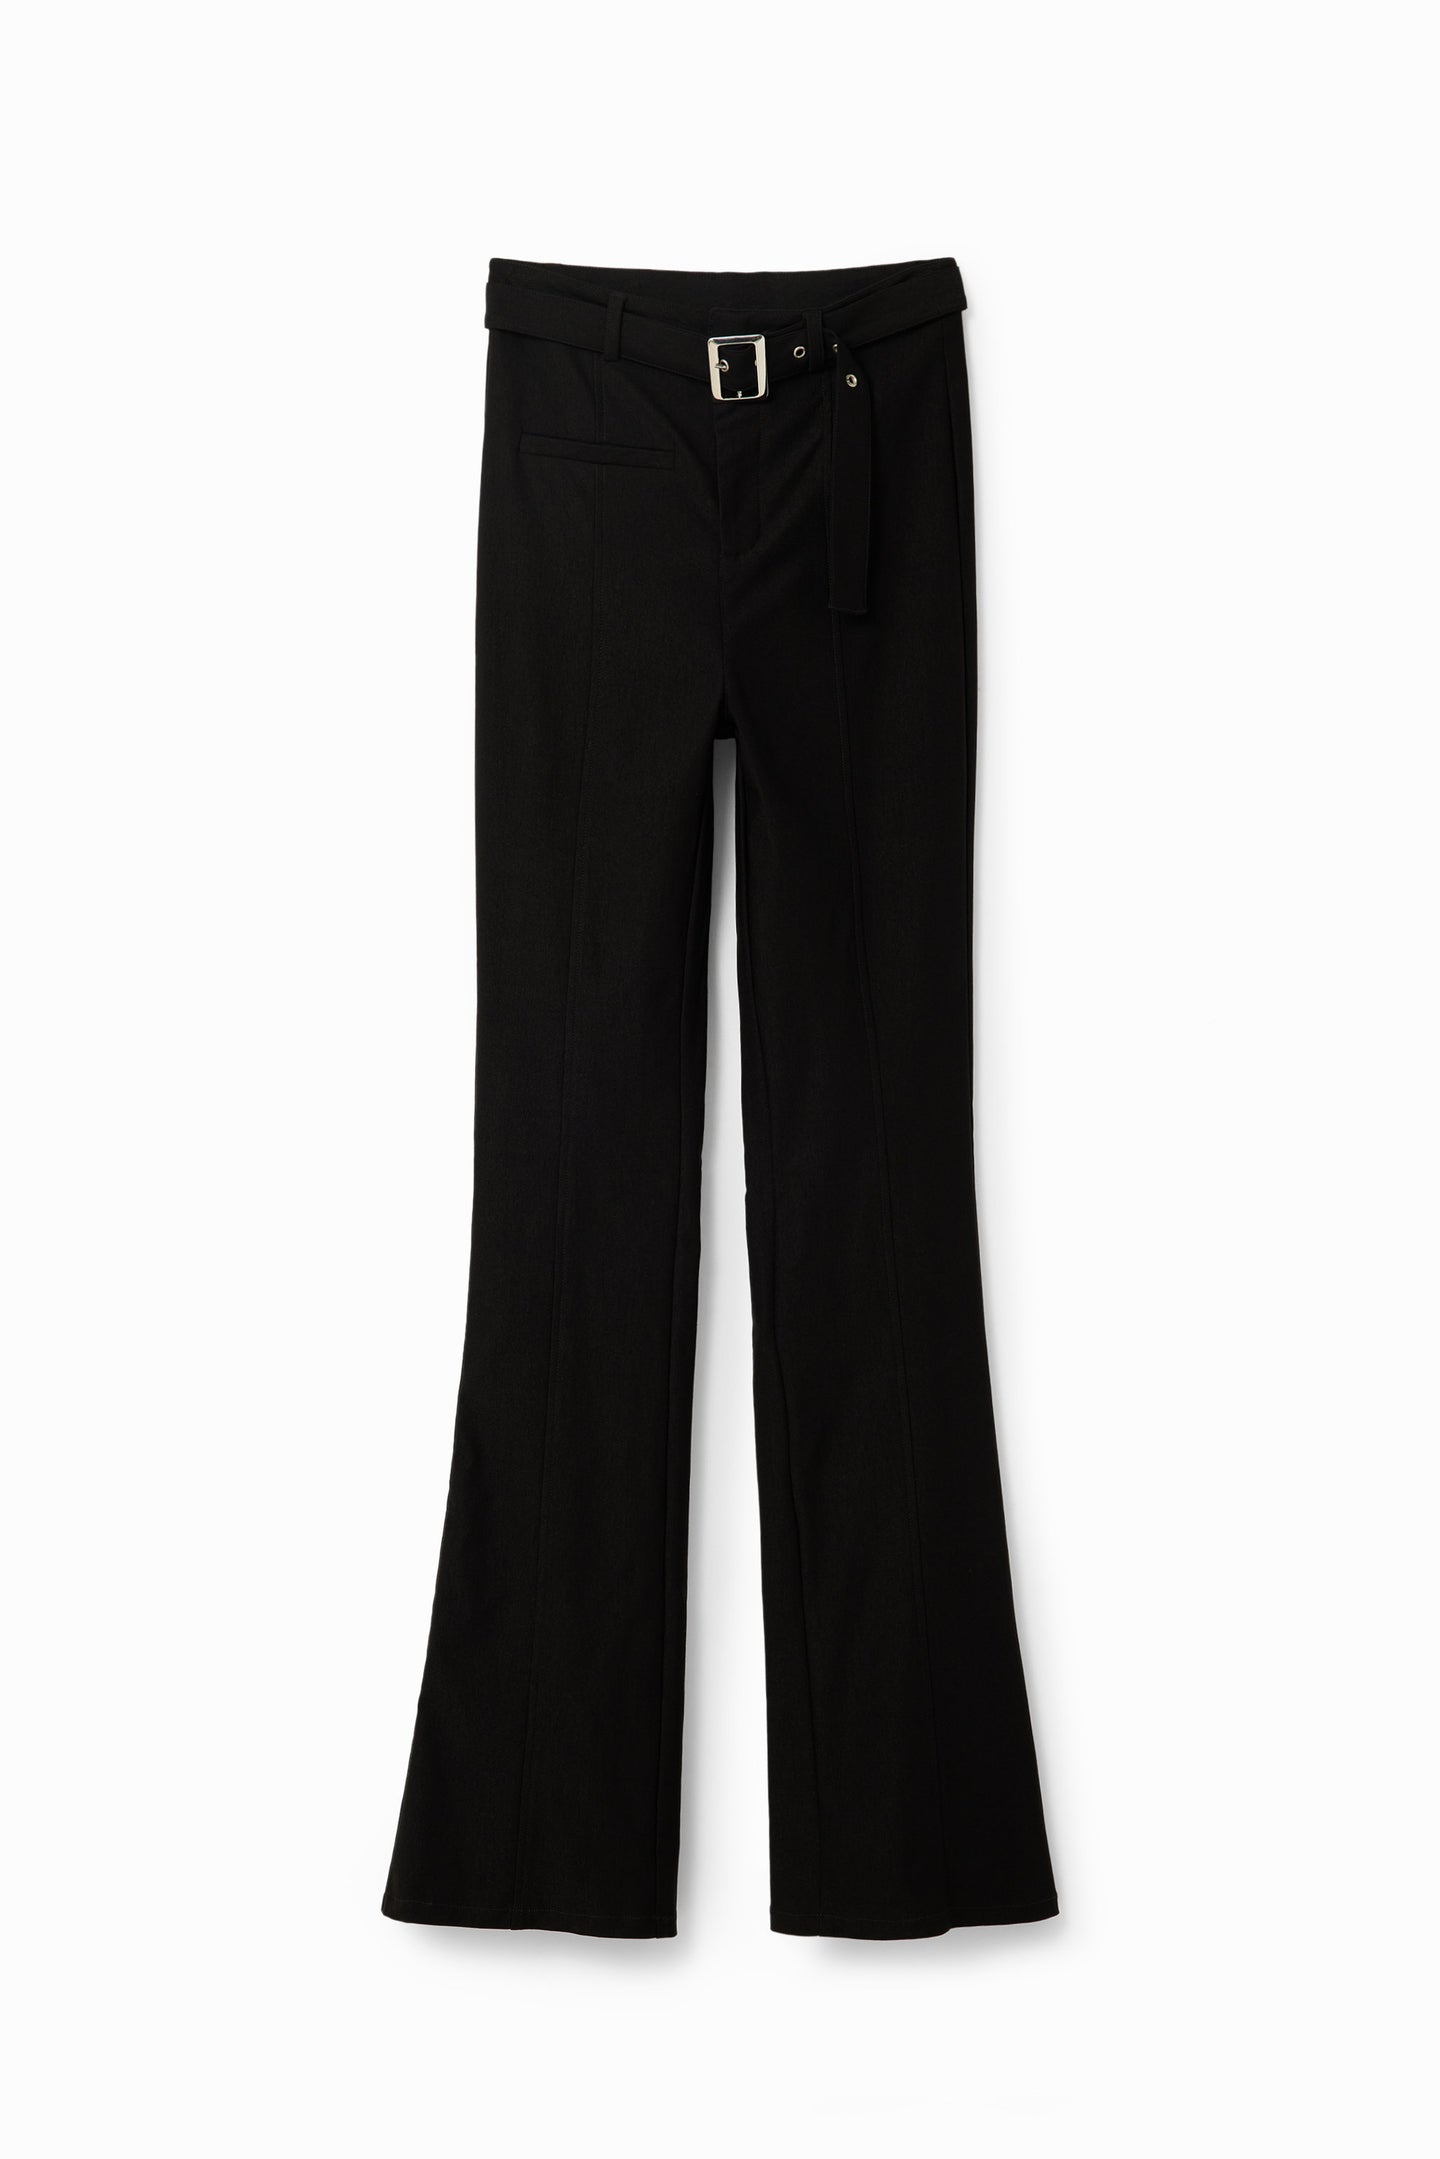 Desigual Belted Flare Trousers 23WWPW05 - Above The Crowd Boutique